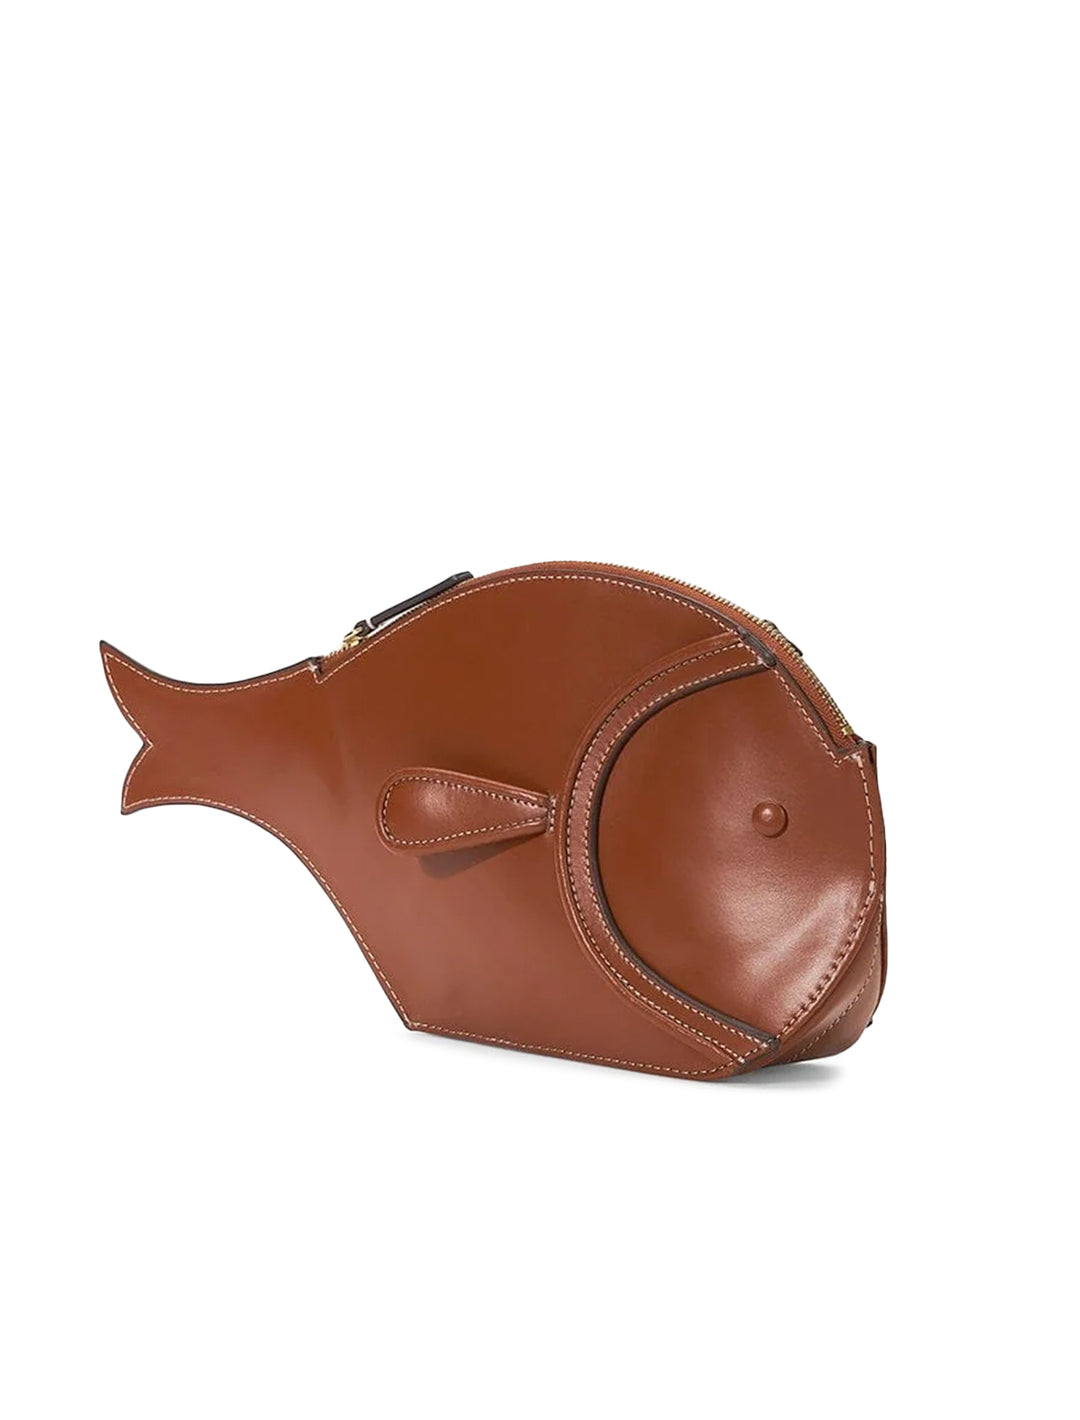 Front angle view of STAUD's pesce leather clutch in tan.